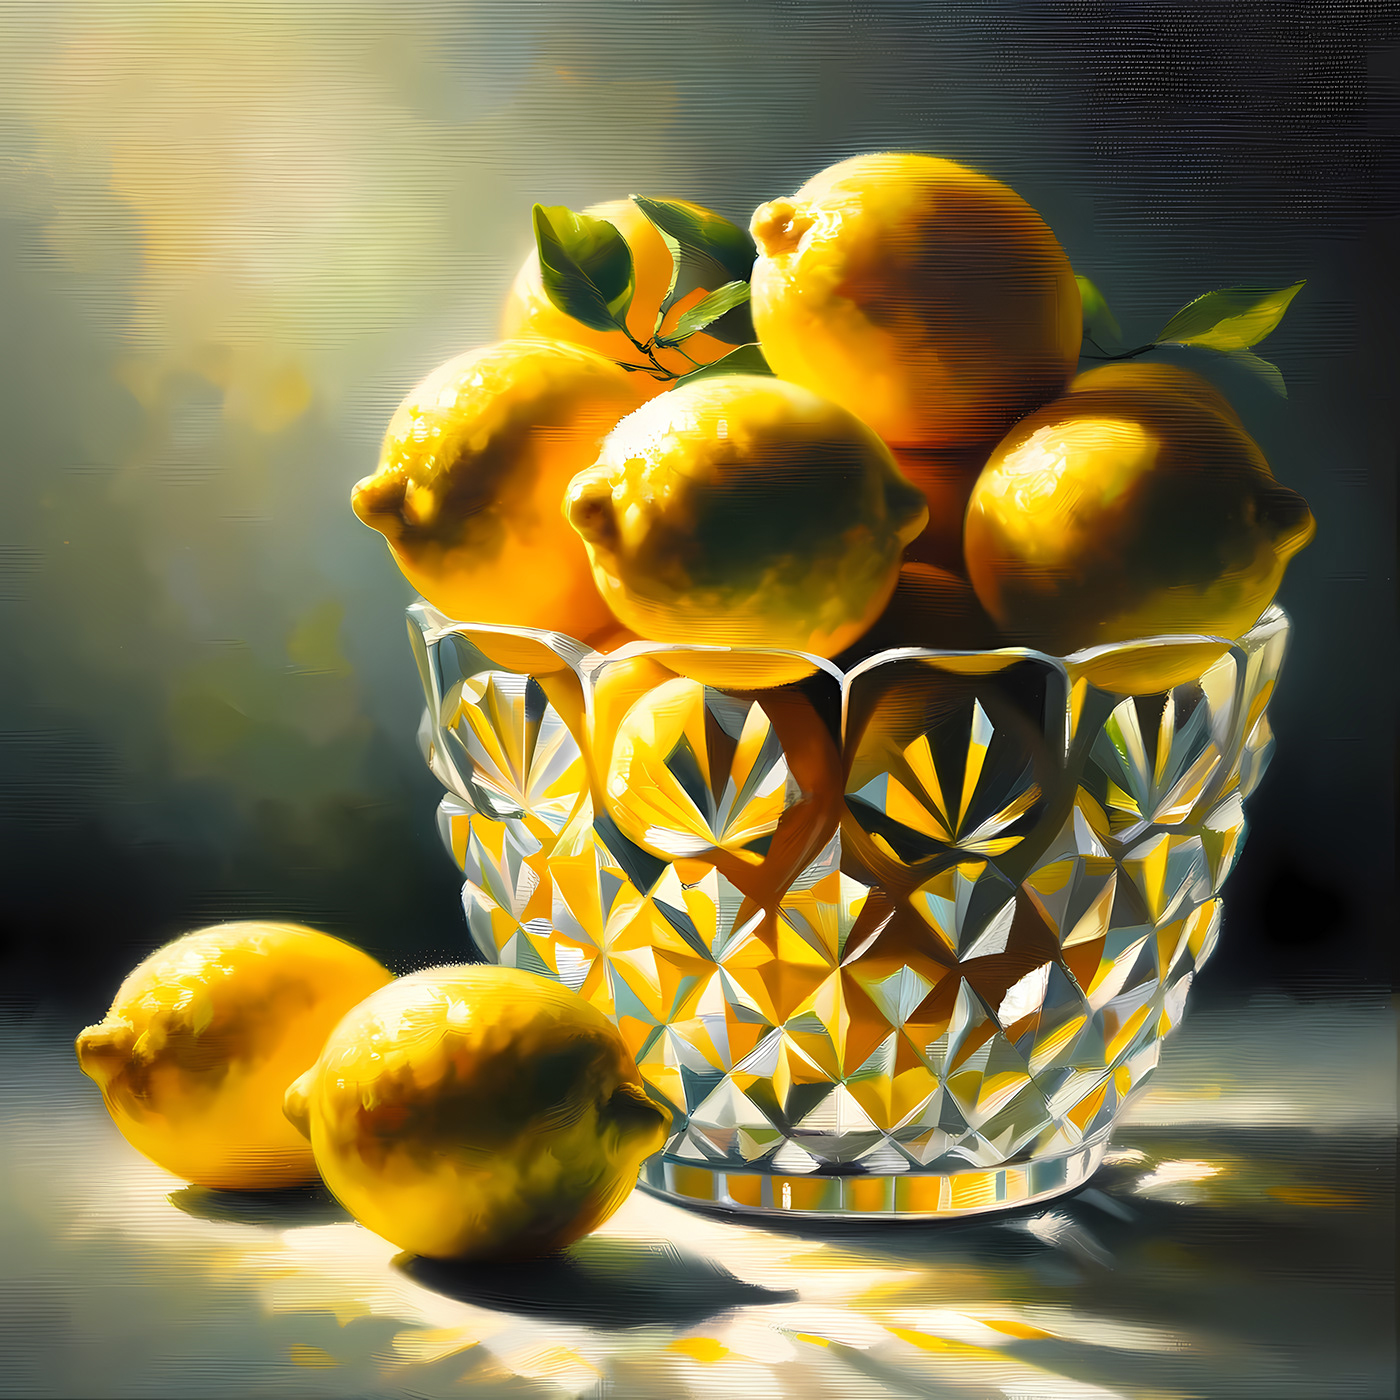 Image may contain: table, fruit and yellow